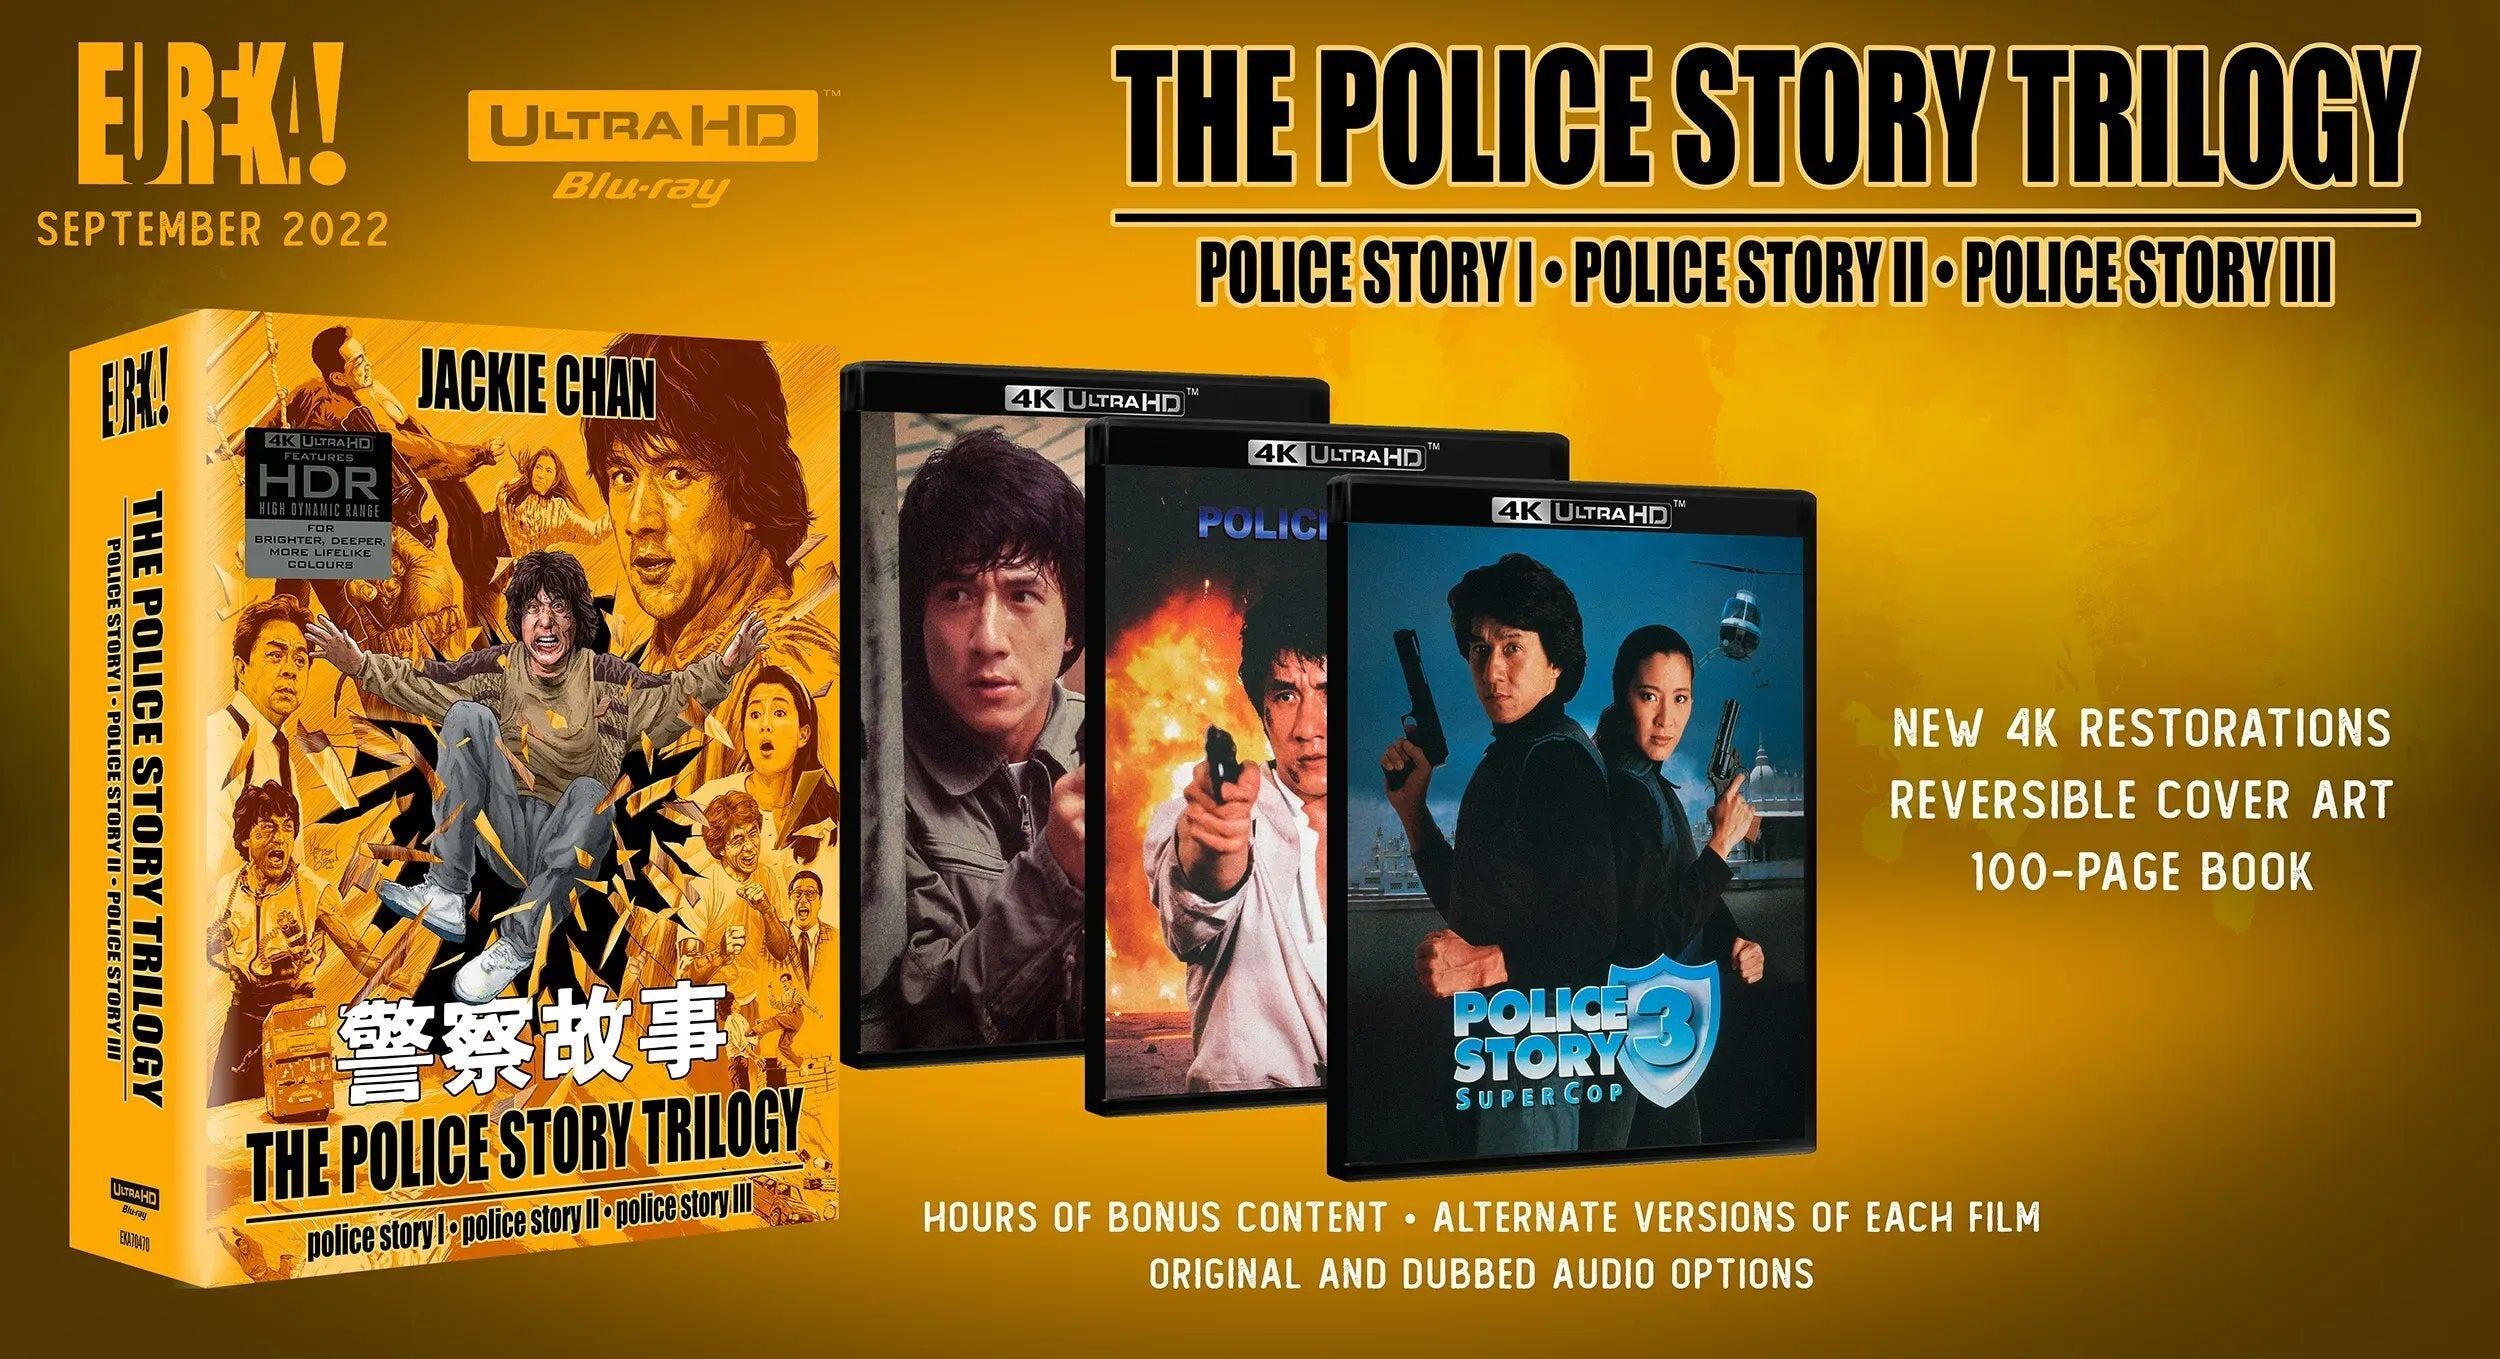 THE POLICE STORY TRILOGY (REGION FREE IMPORT - LIMITED EDITION) 4K UHD [SCRATCH AND DENT]